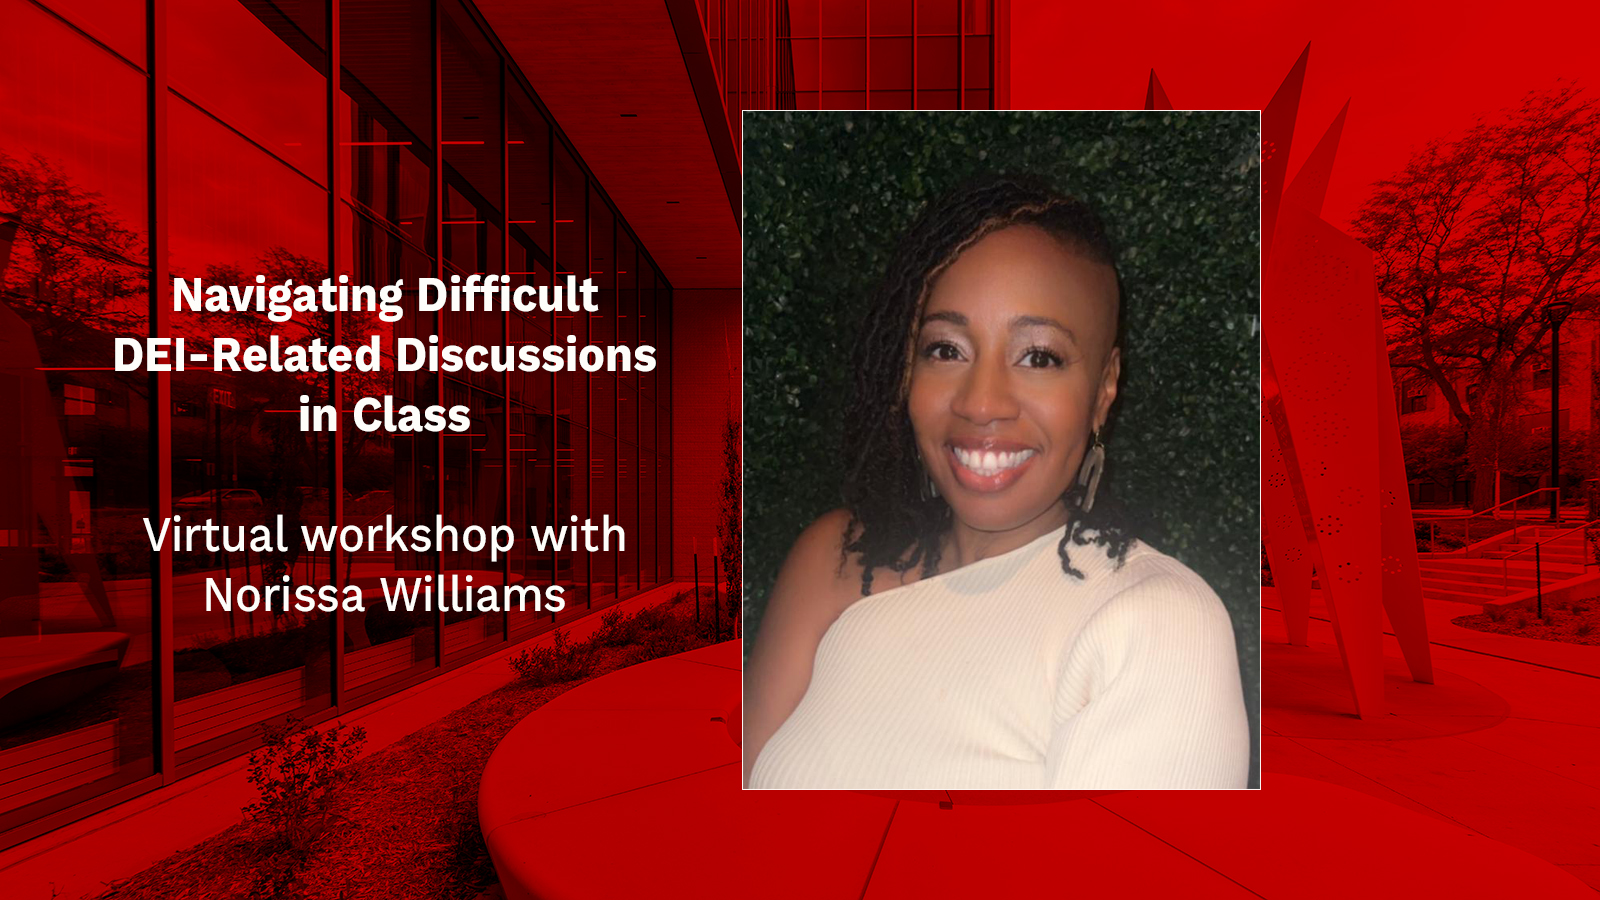 Norissa Williams headshot, text reads "Navigating Difficult DEI-Related Discussions in Class; Virtual workshop with Norissa Williams"; exterior photo of Carolyn Pope Edwards Hall with red overlay in background